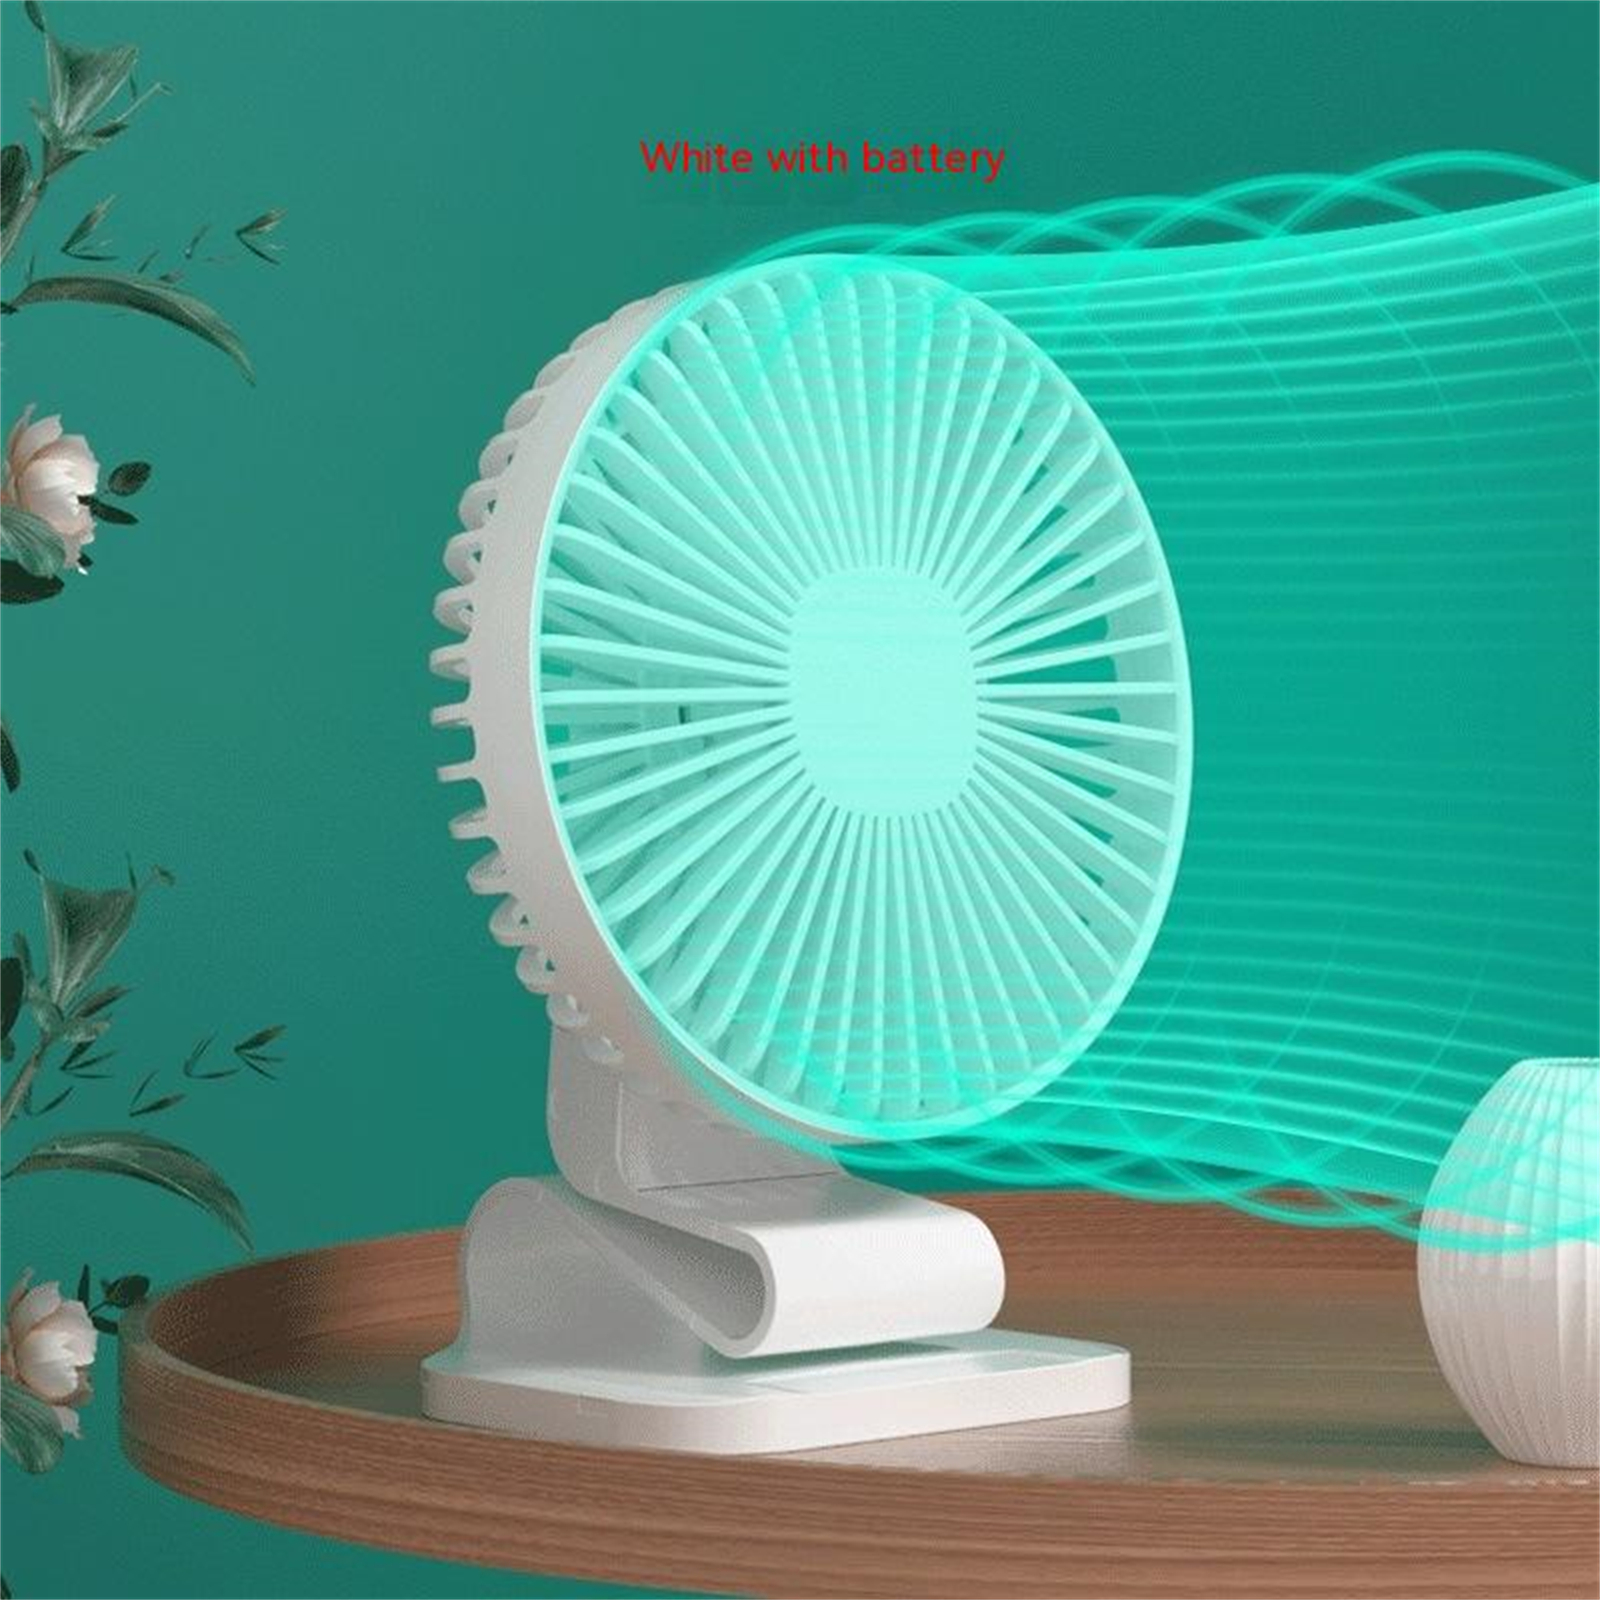 0.8a 5v Folding Desktop Usb Mini Fan 3 Levels Adjustable Speed Charging Electric Fan For Work Travel F6 white with battery